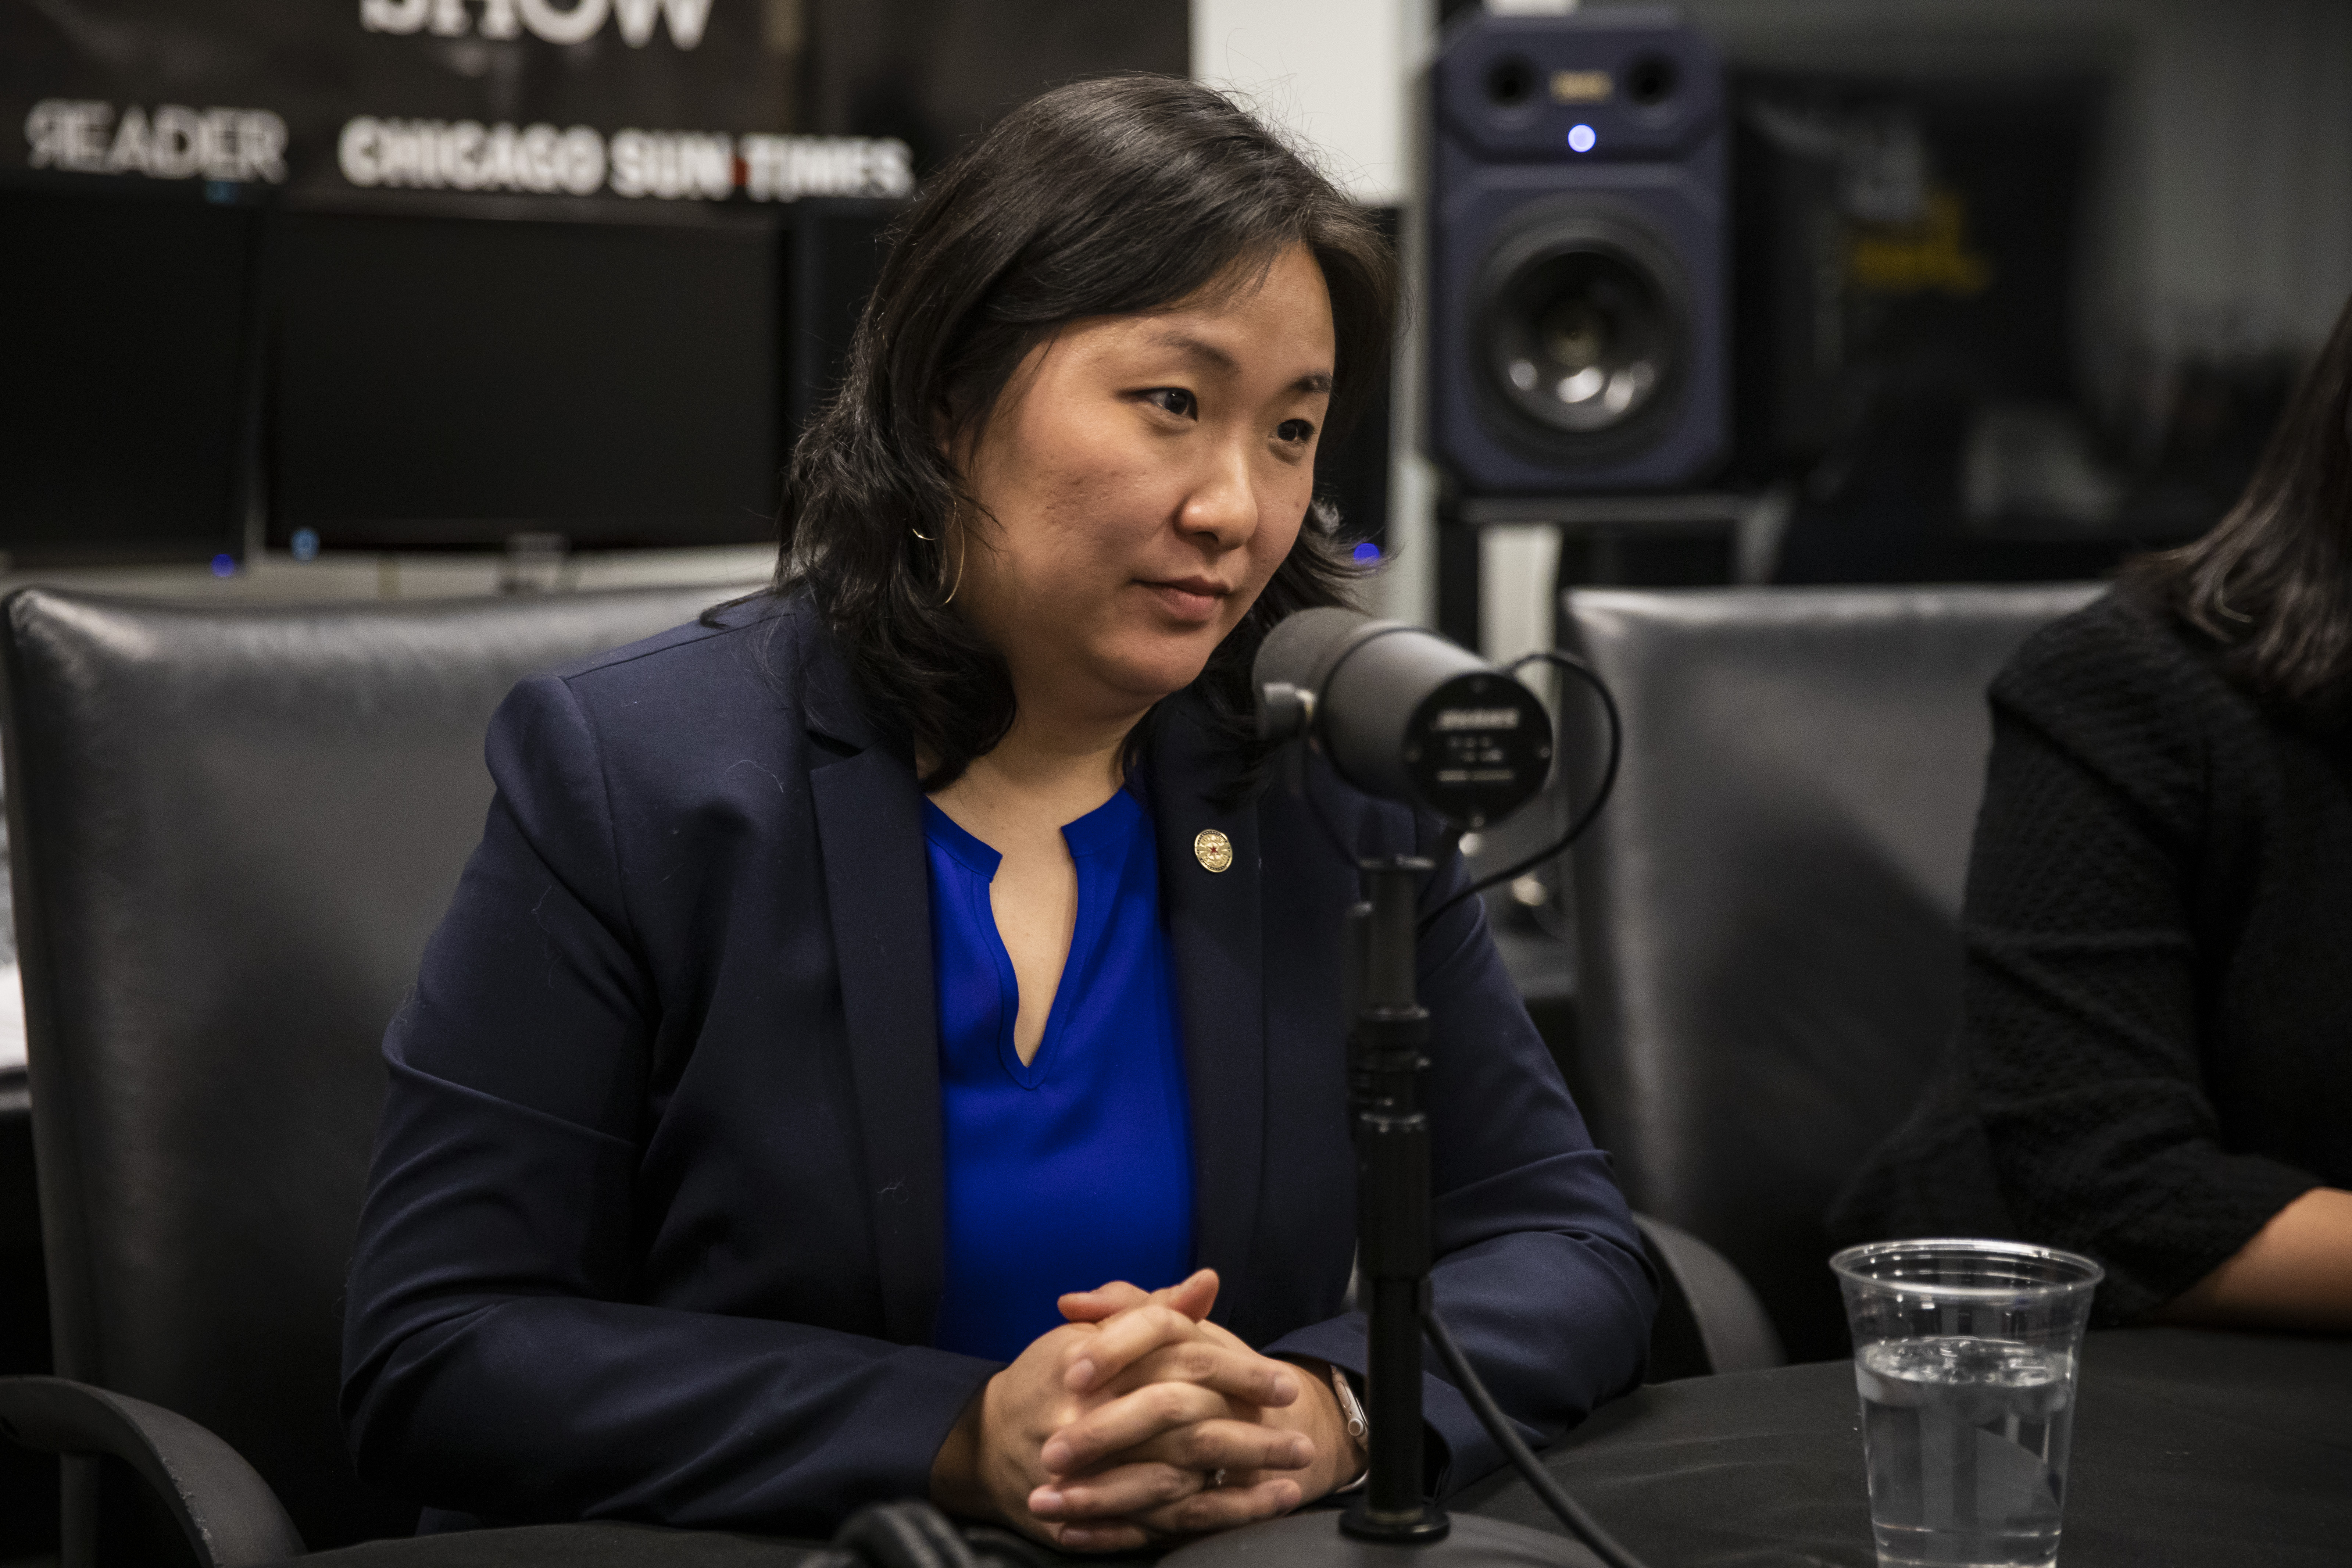 The city’s Budget Director Susie Park sits down for an interview with reporter Fran Spielman at the Chicago Sun-Times, Friday morning, Dec. 13, 2019.